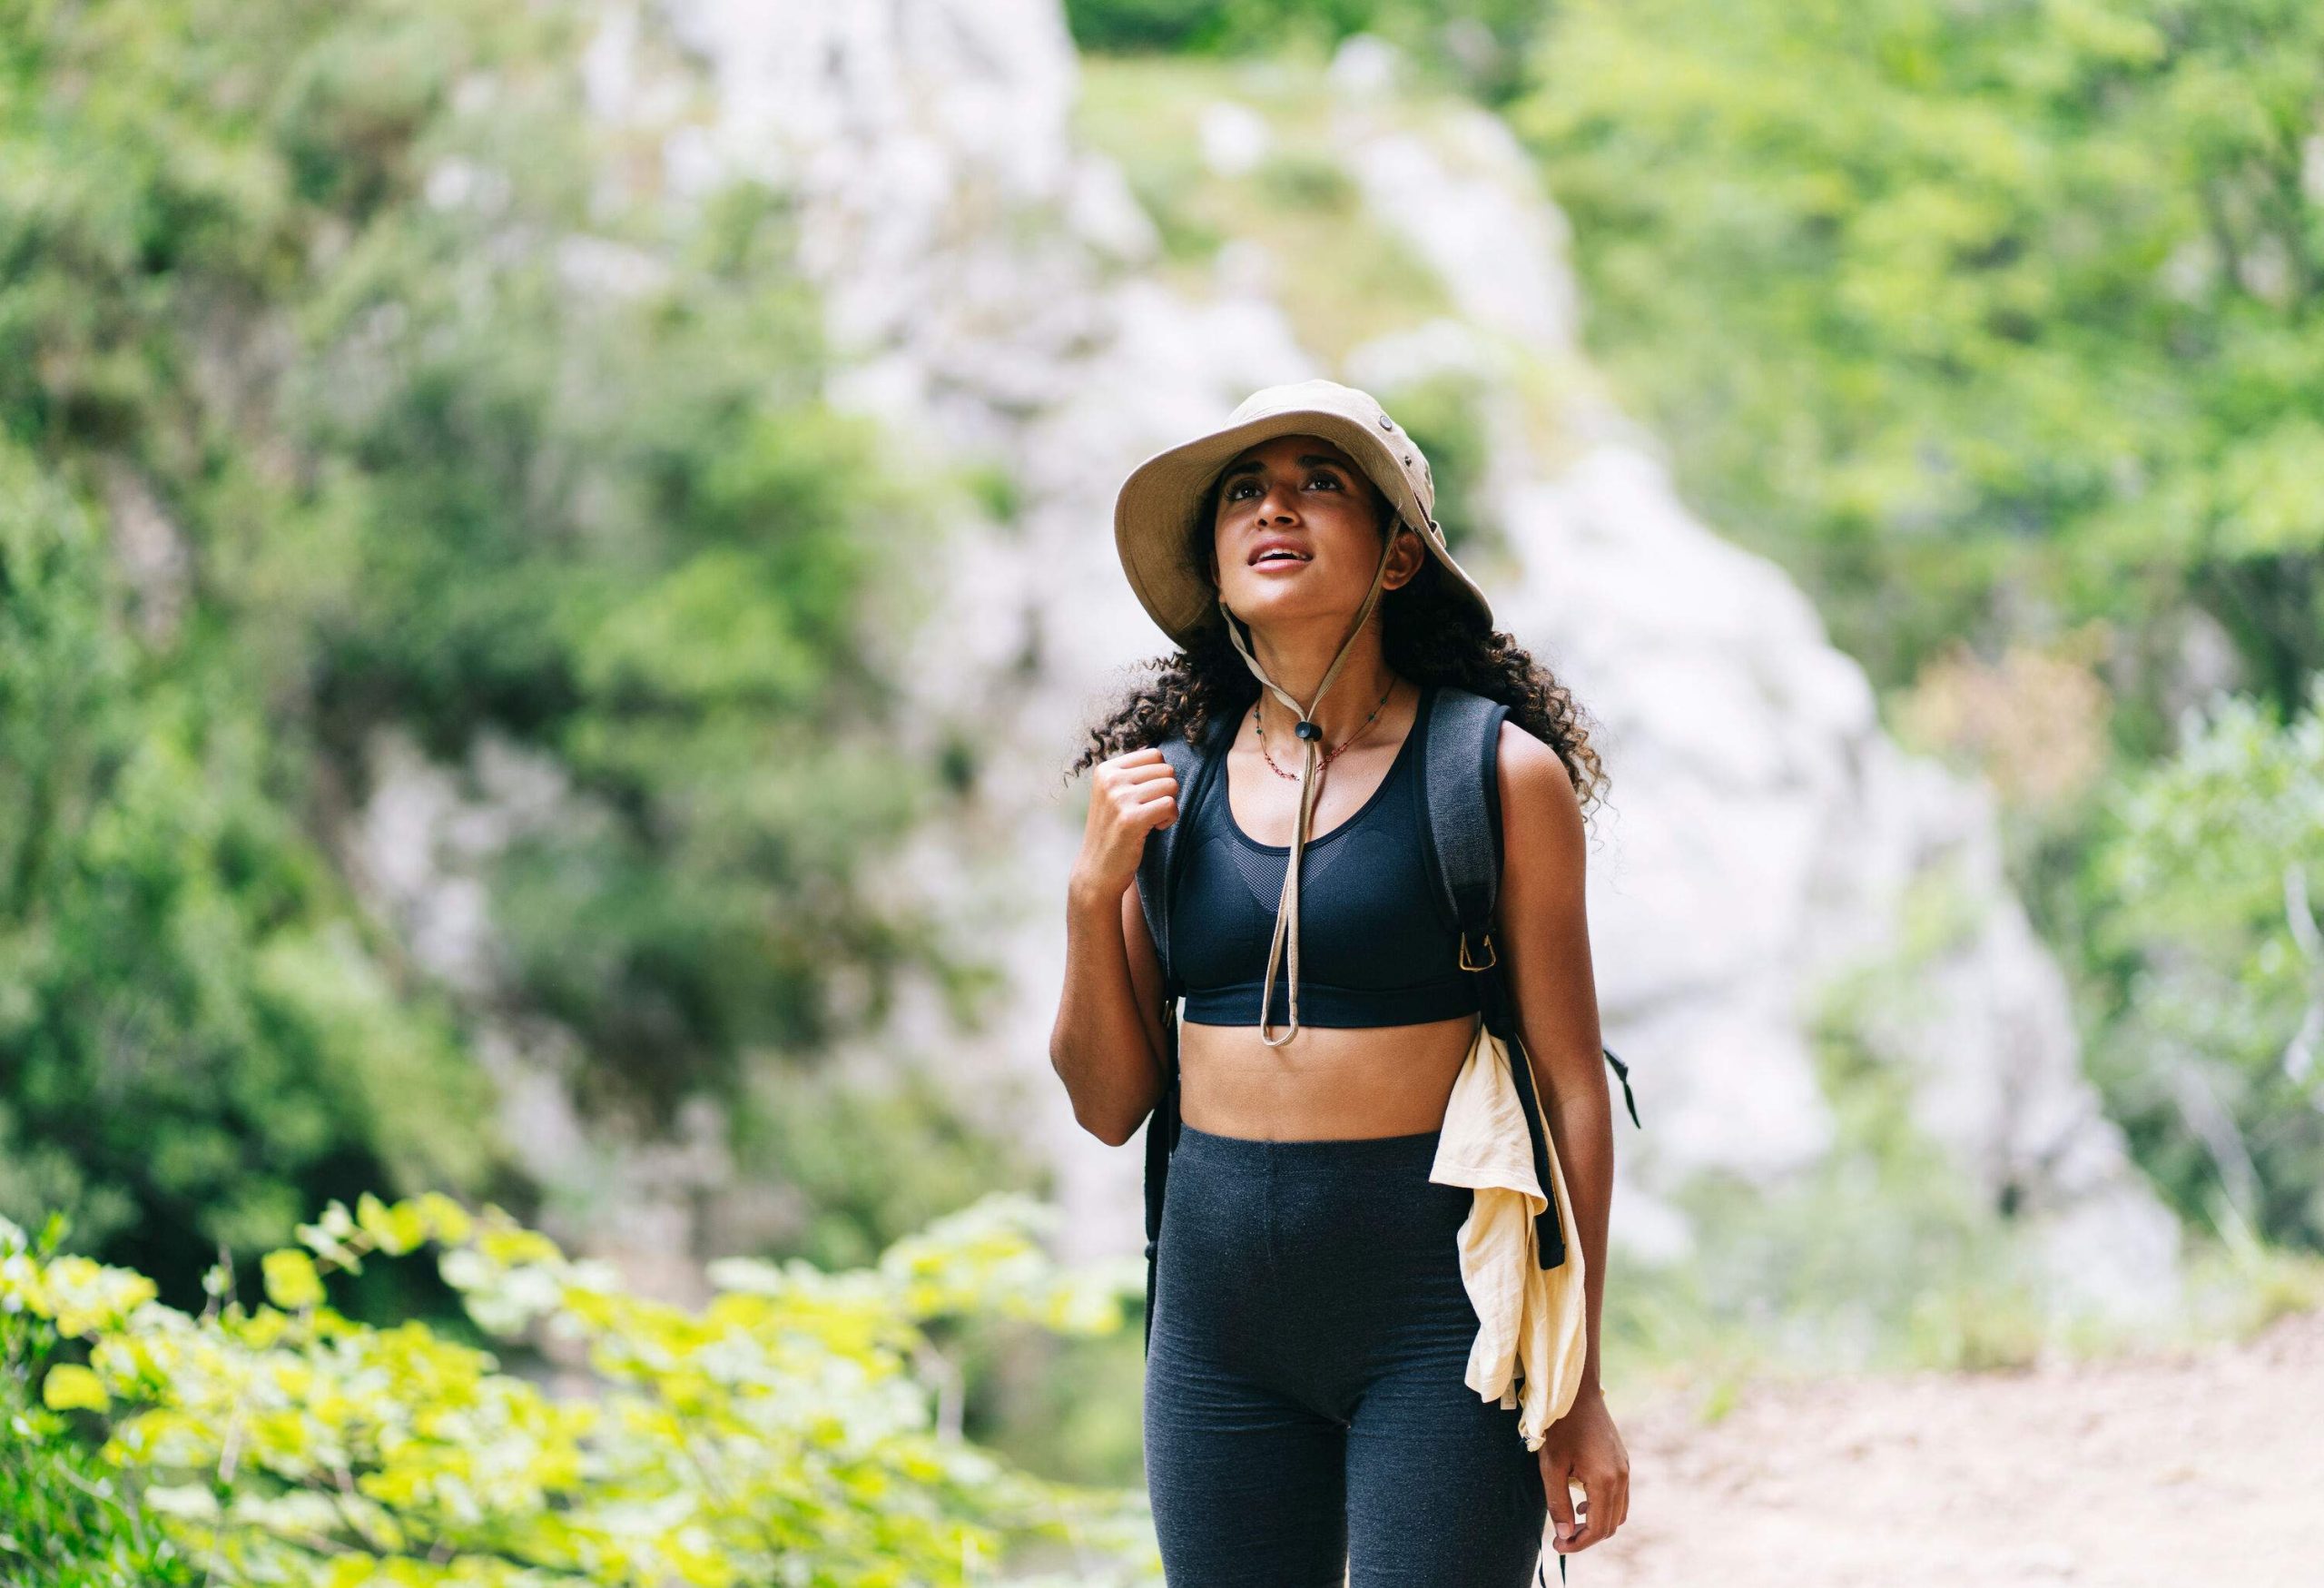 A woman in a sports bra with black leggings and a brown hat is looking up into the forest.